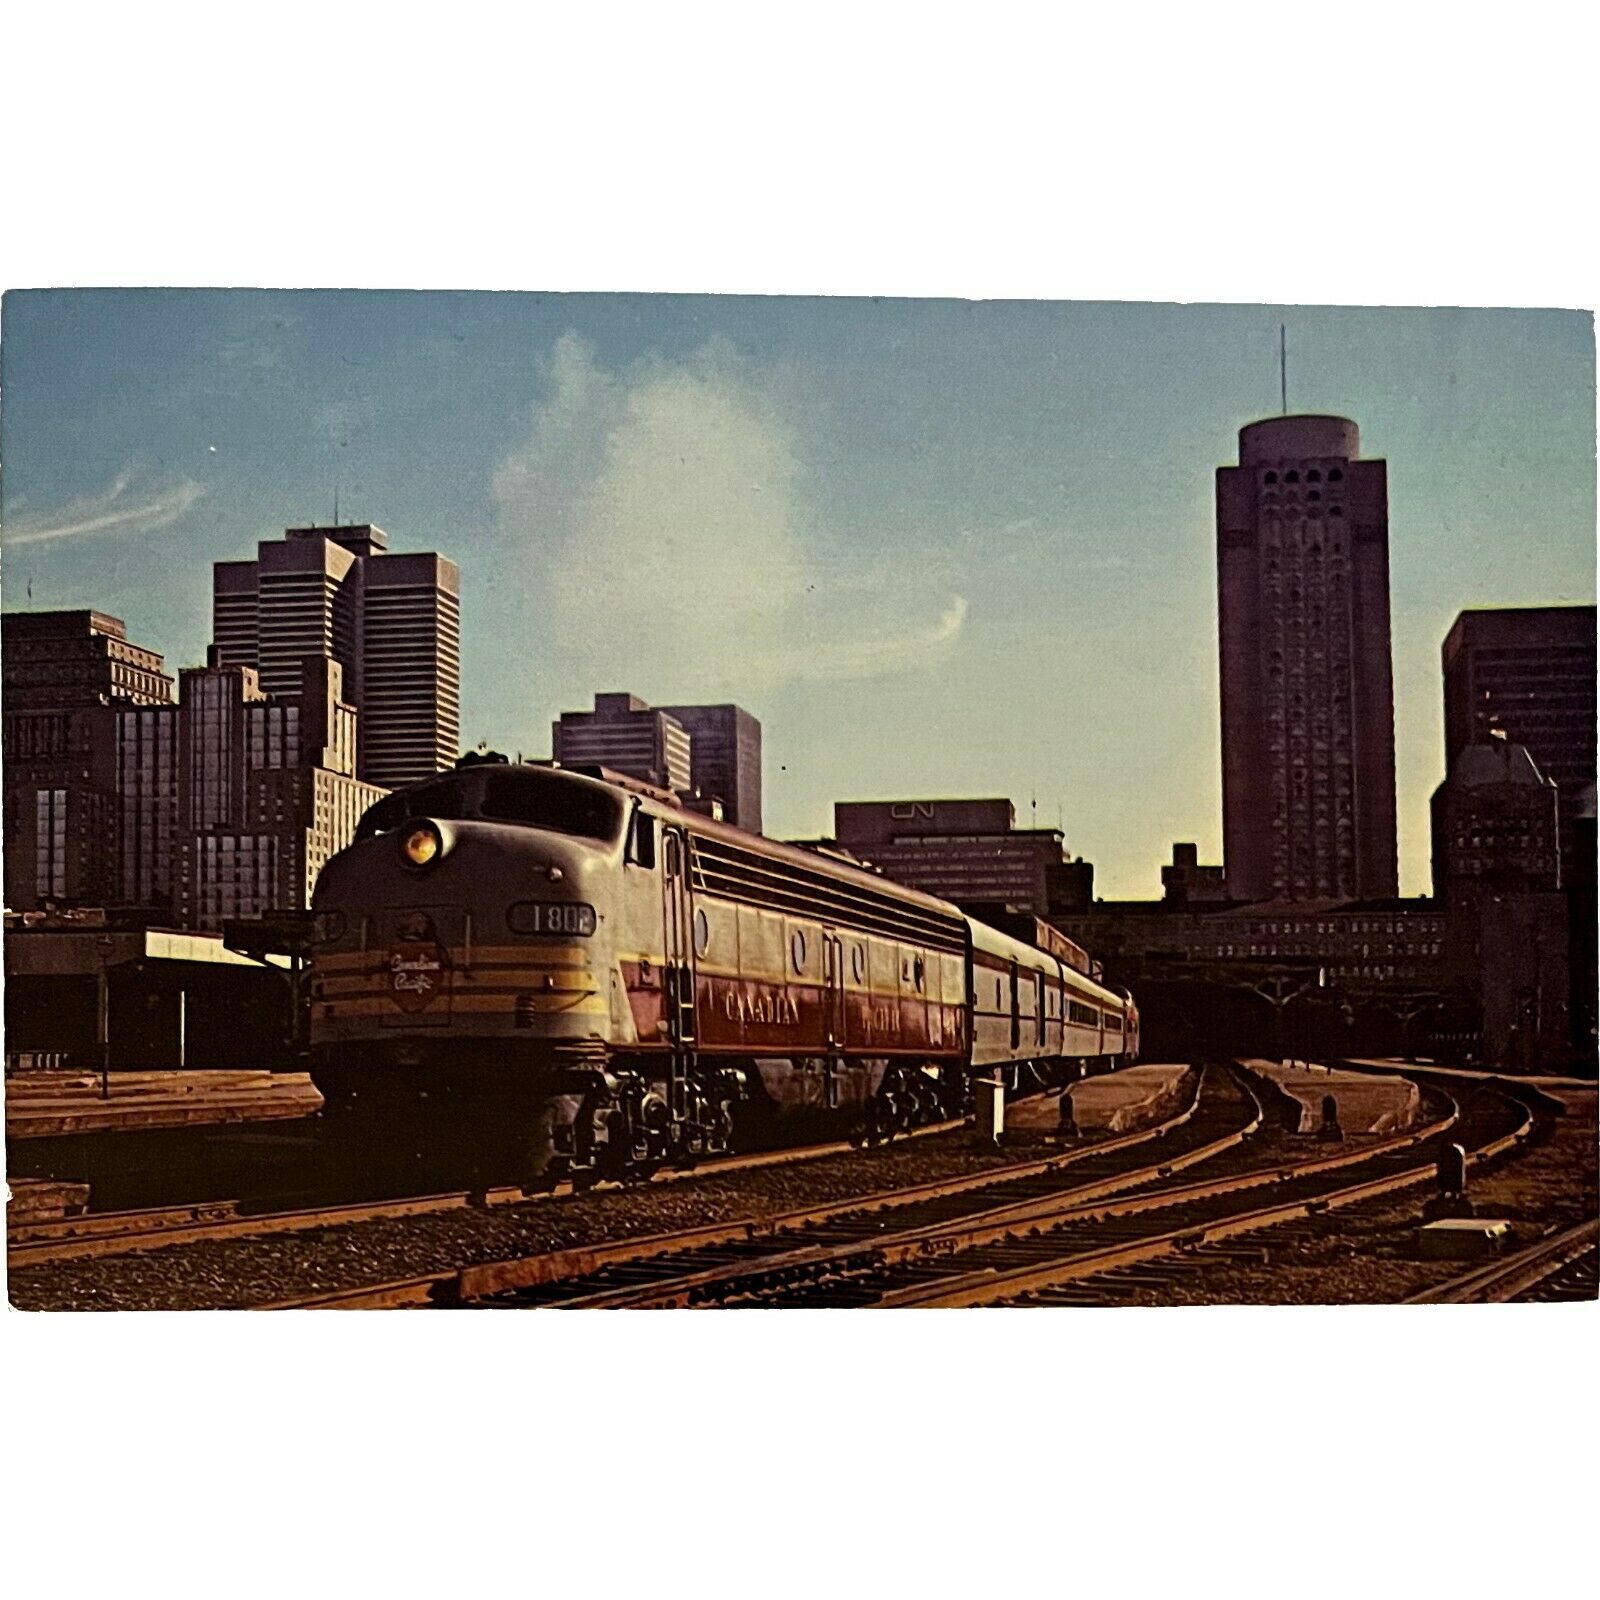 Primary image for Postcard Locomotive, The Canadian Pacific 1802, GM, Montreal, Quebec City